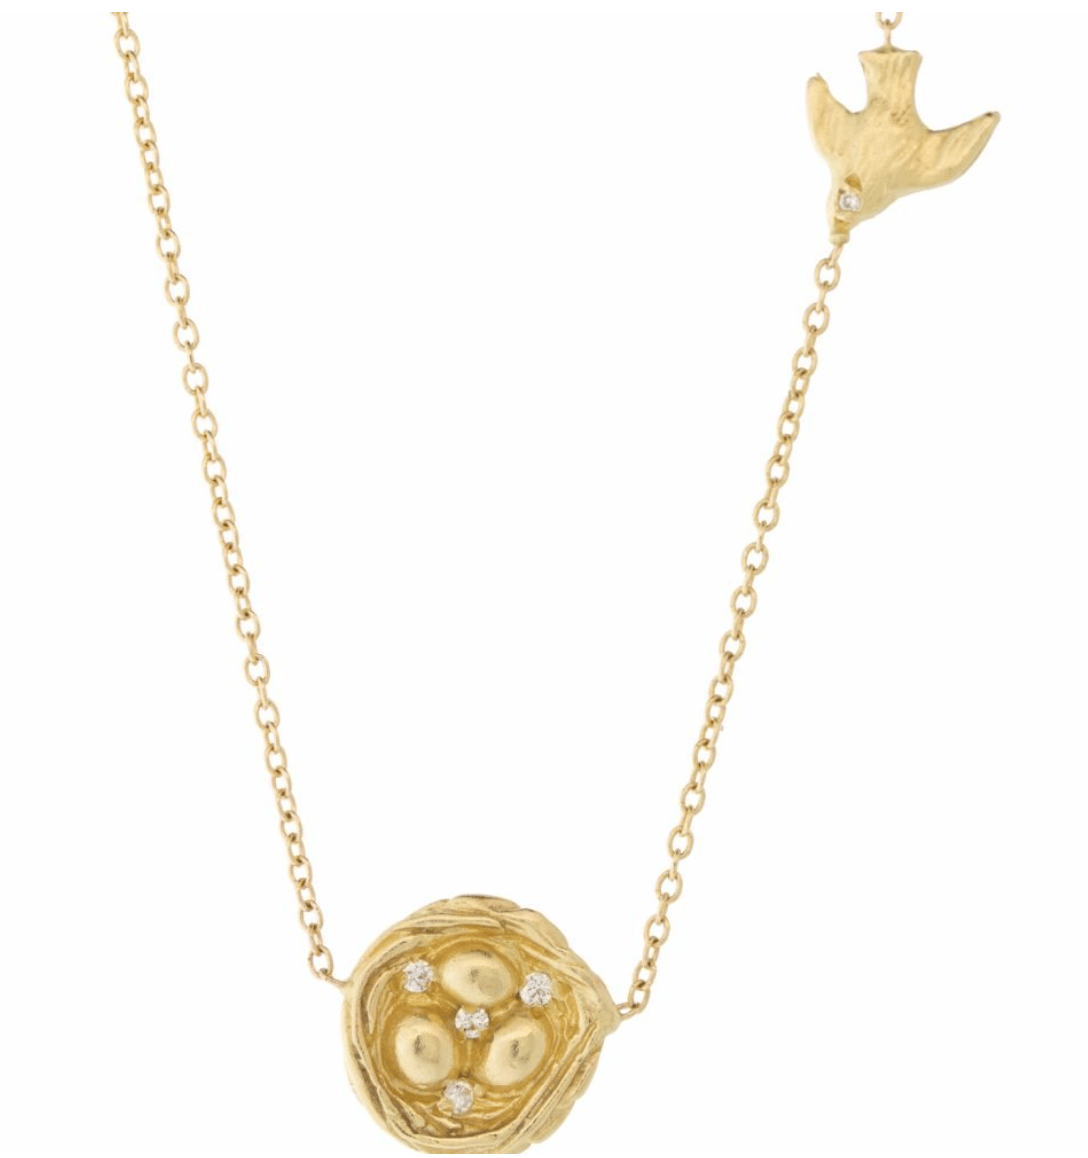 Image of 14 kt Gold and Diamonds Bird and Nest Necklace 